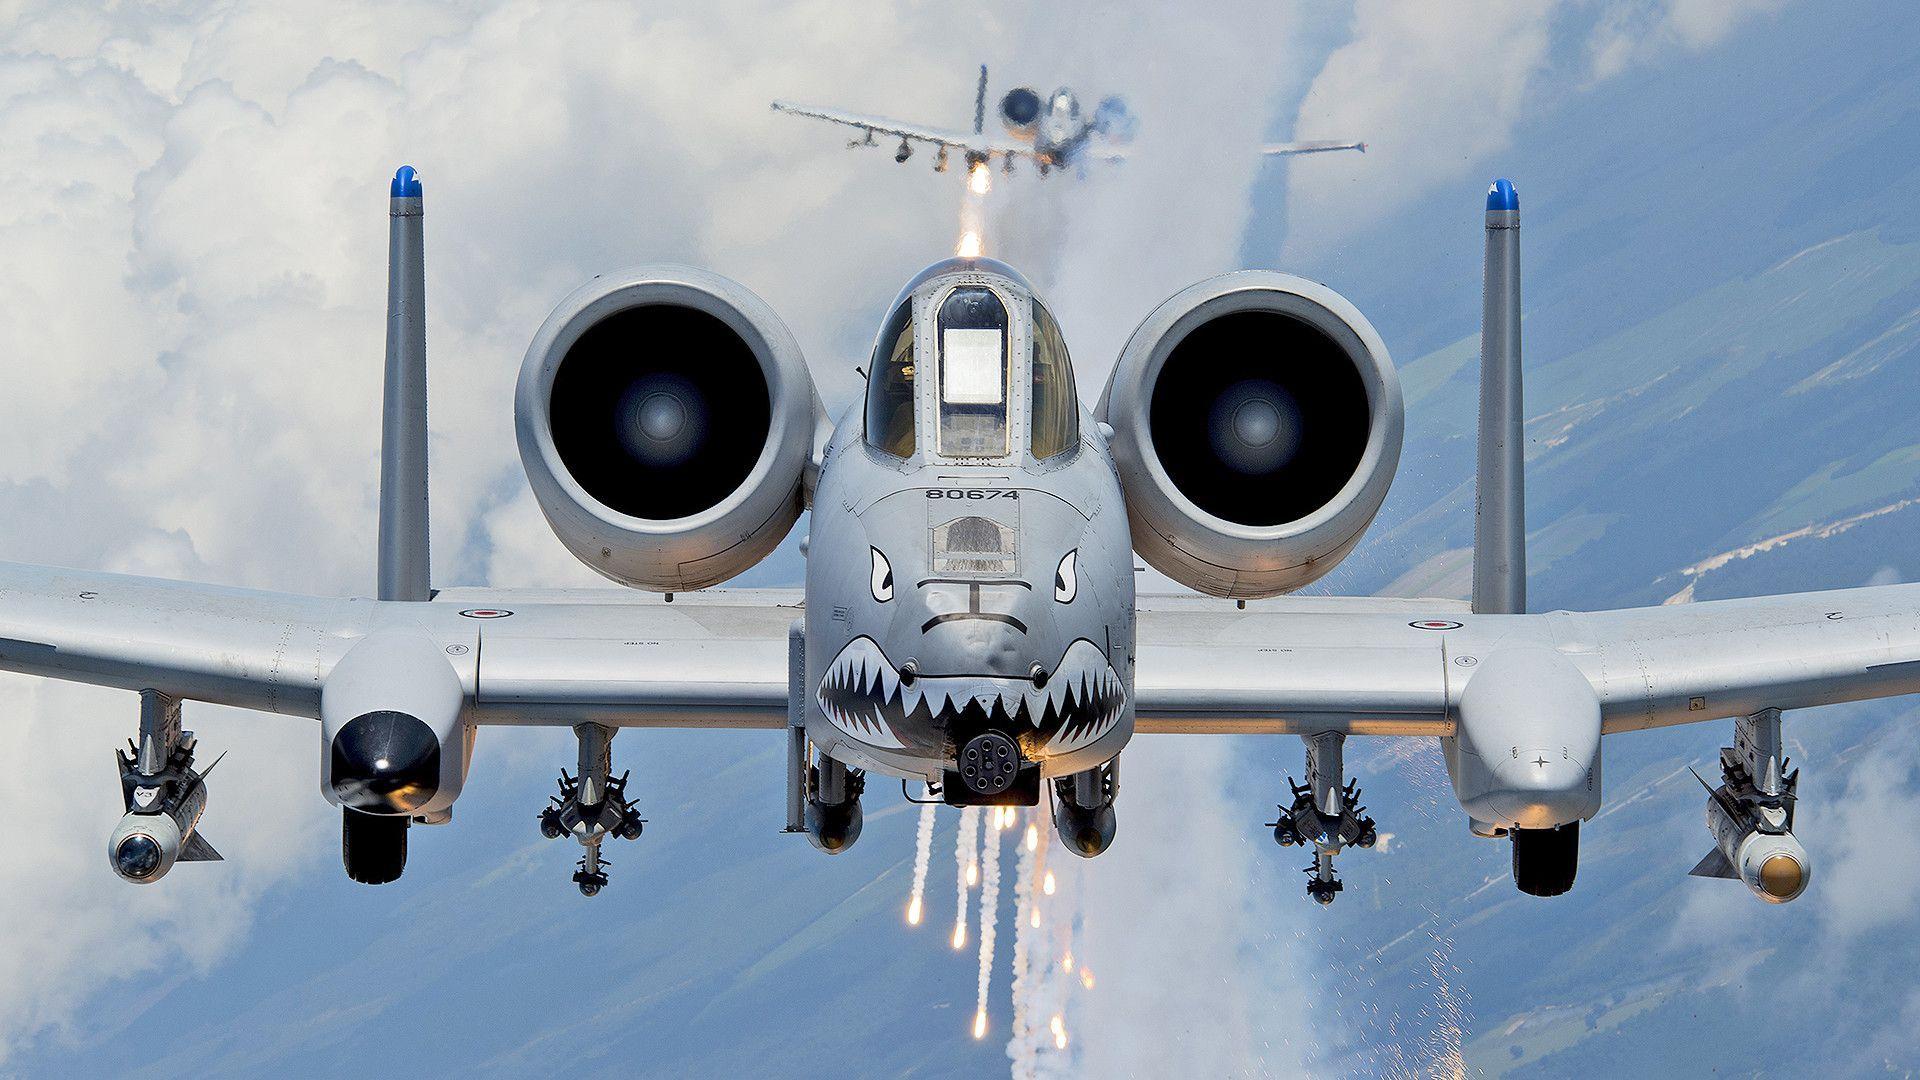 A-10 Warthog Wallpapers - Top Free A-10 Warthog Backgrounds